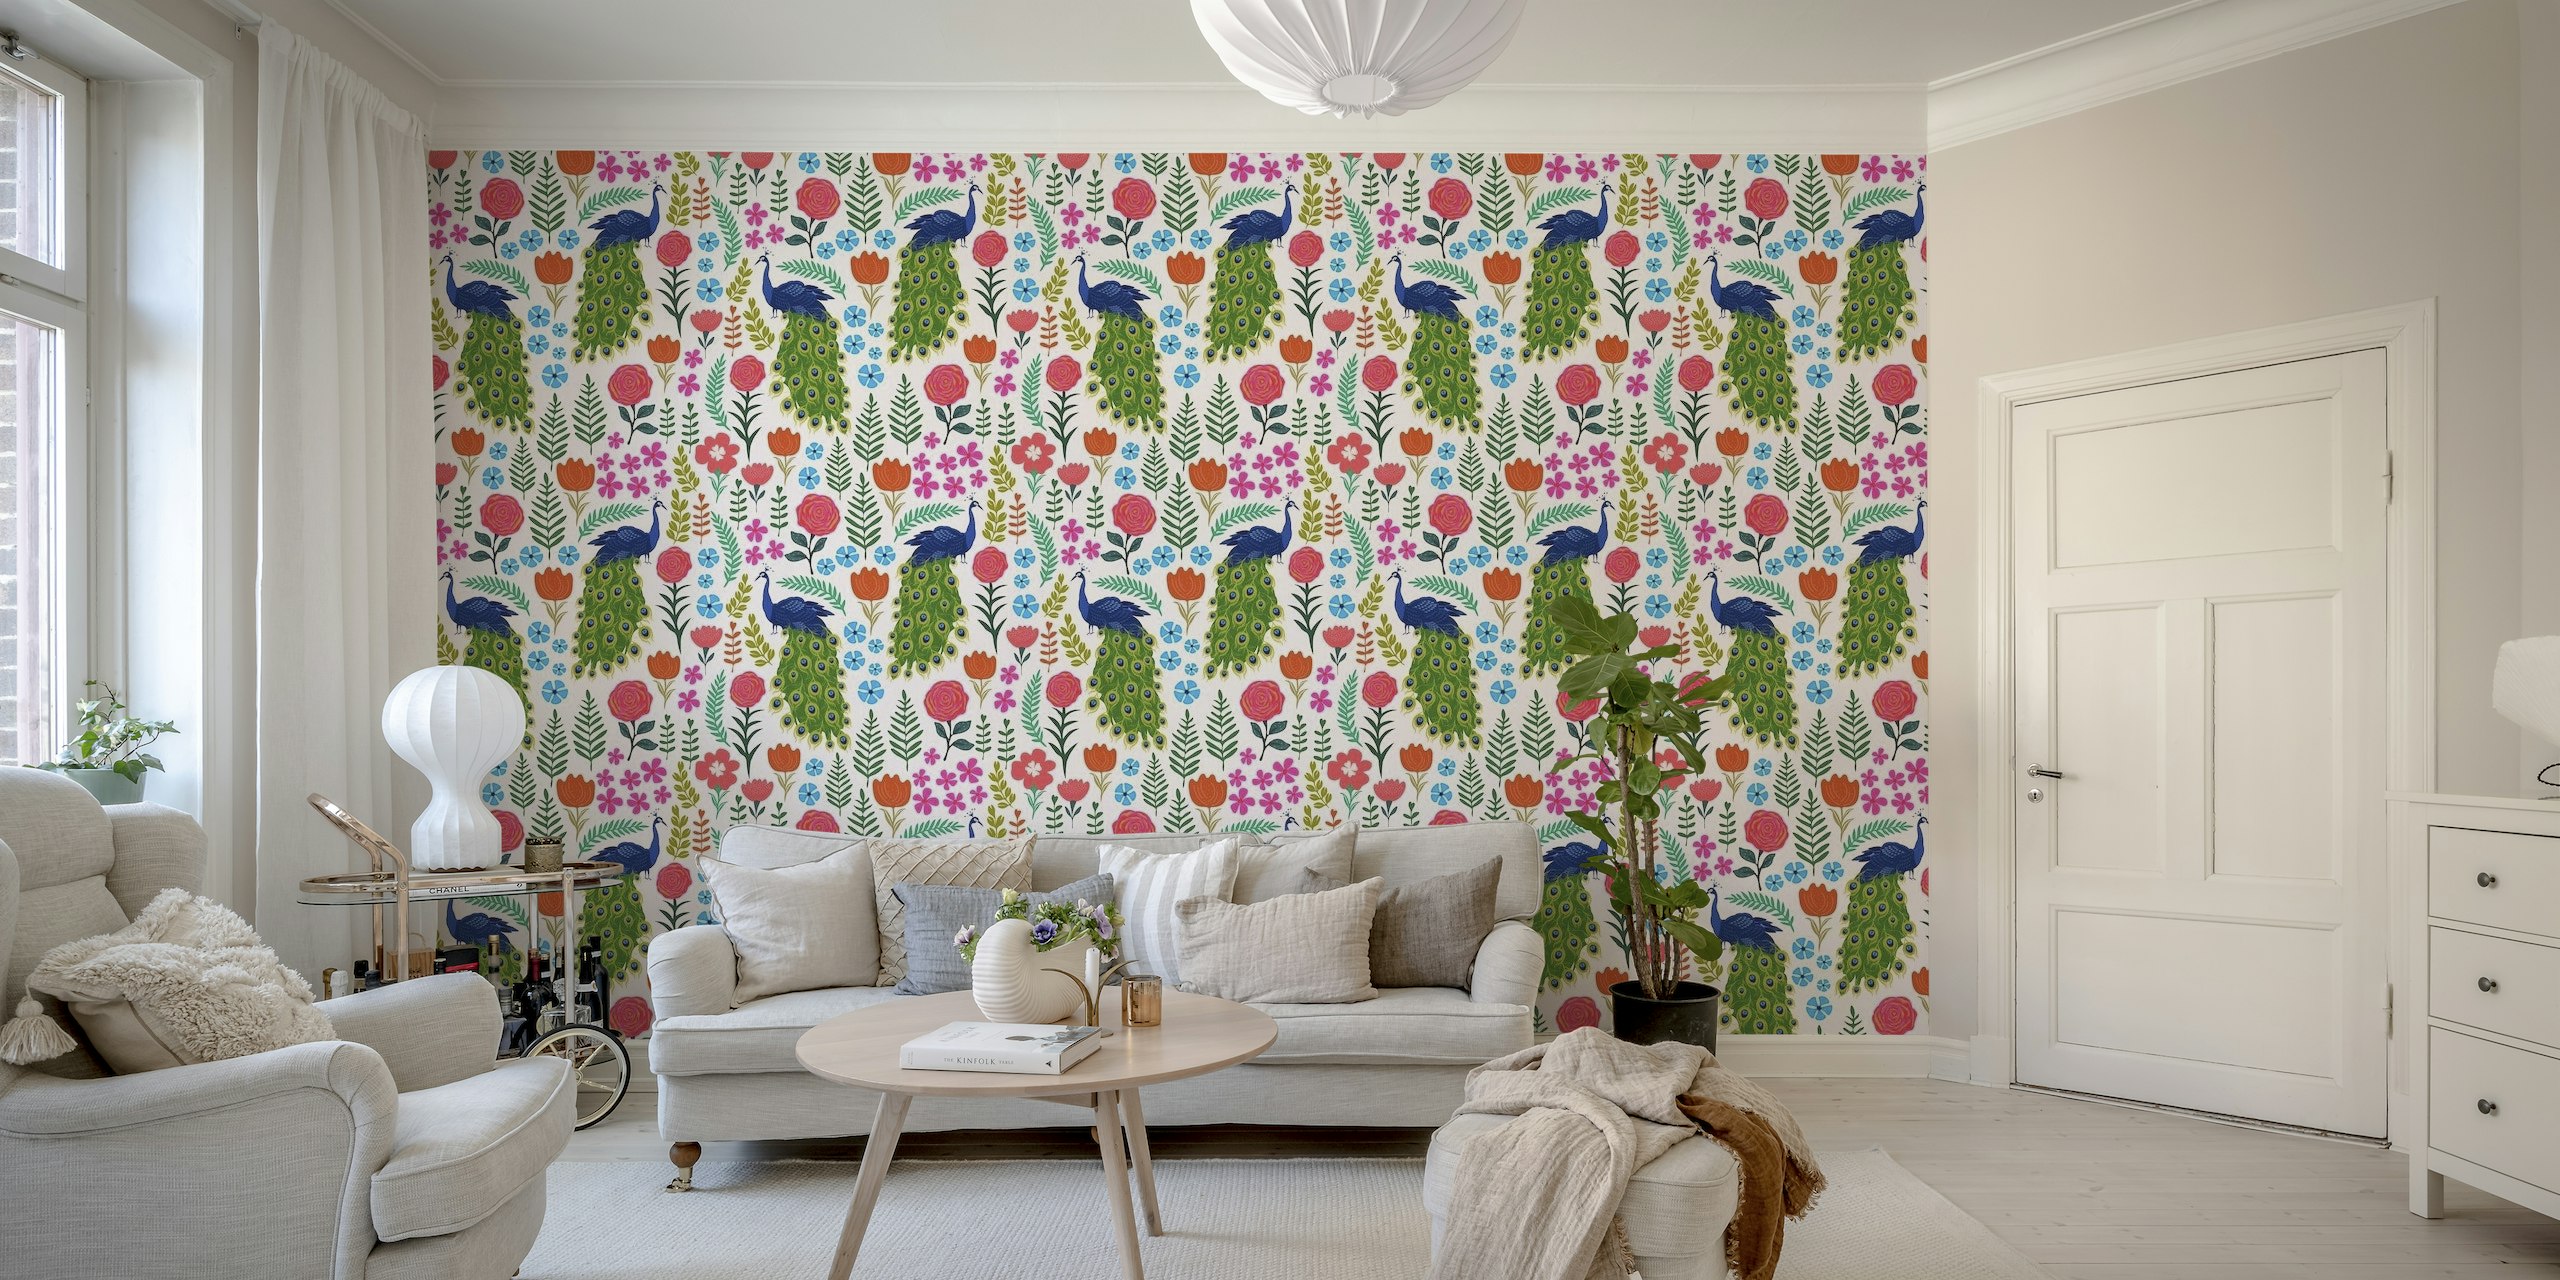 Peacock Floral Garden wall mural with vibrant flowers and peacock illustrations